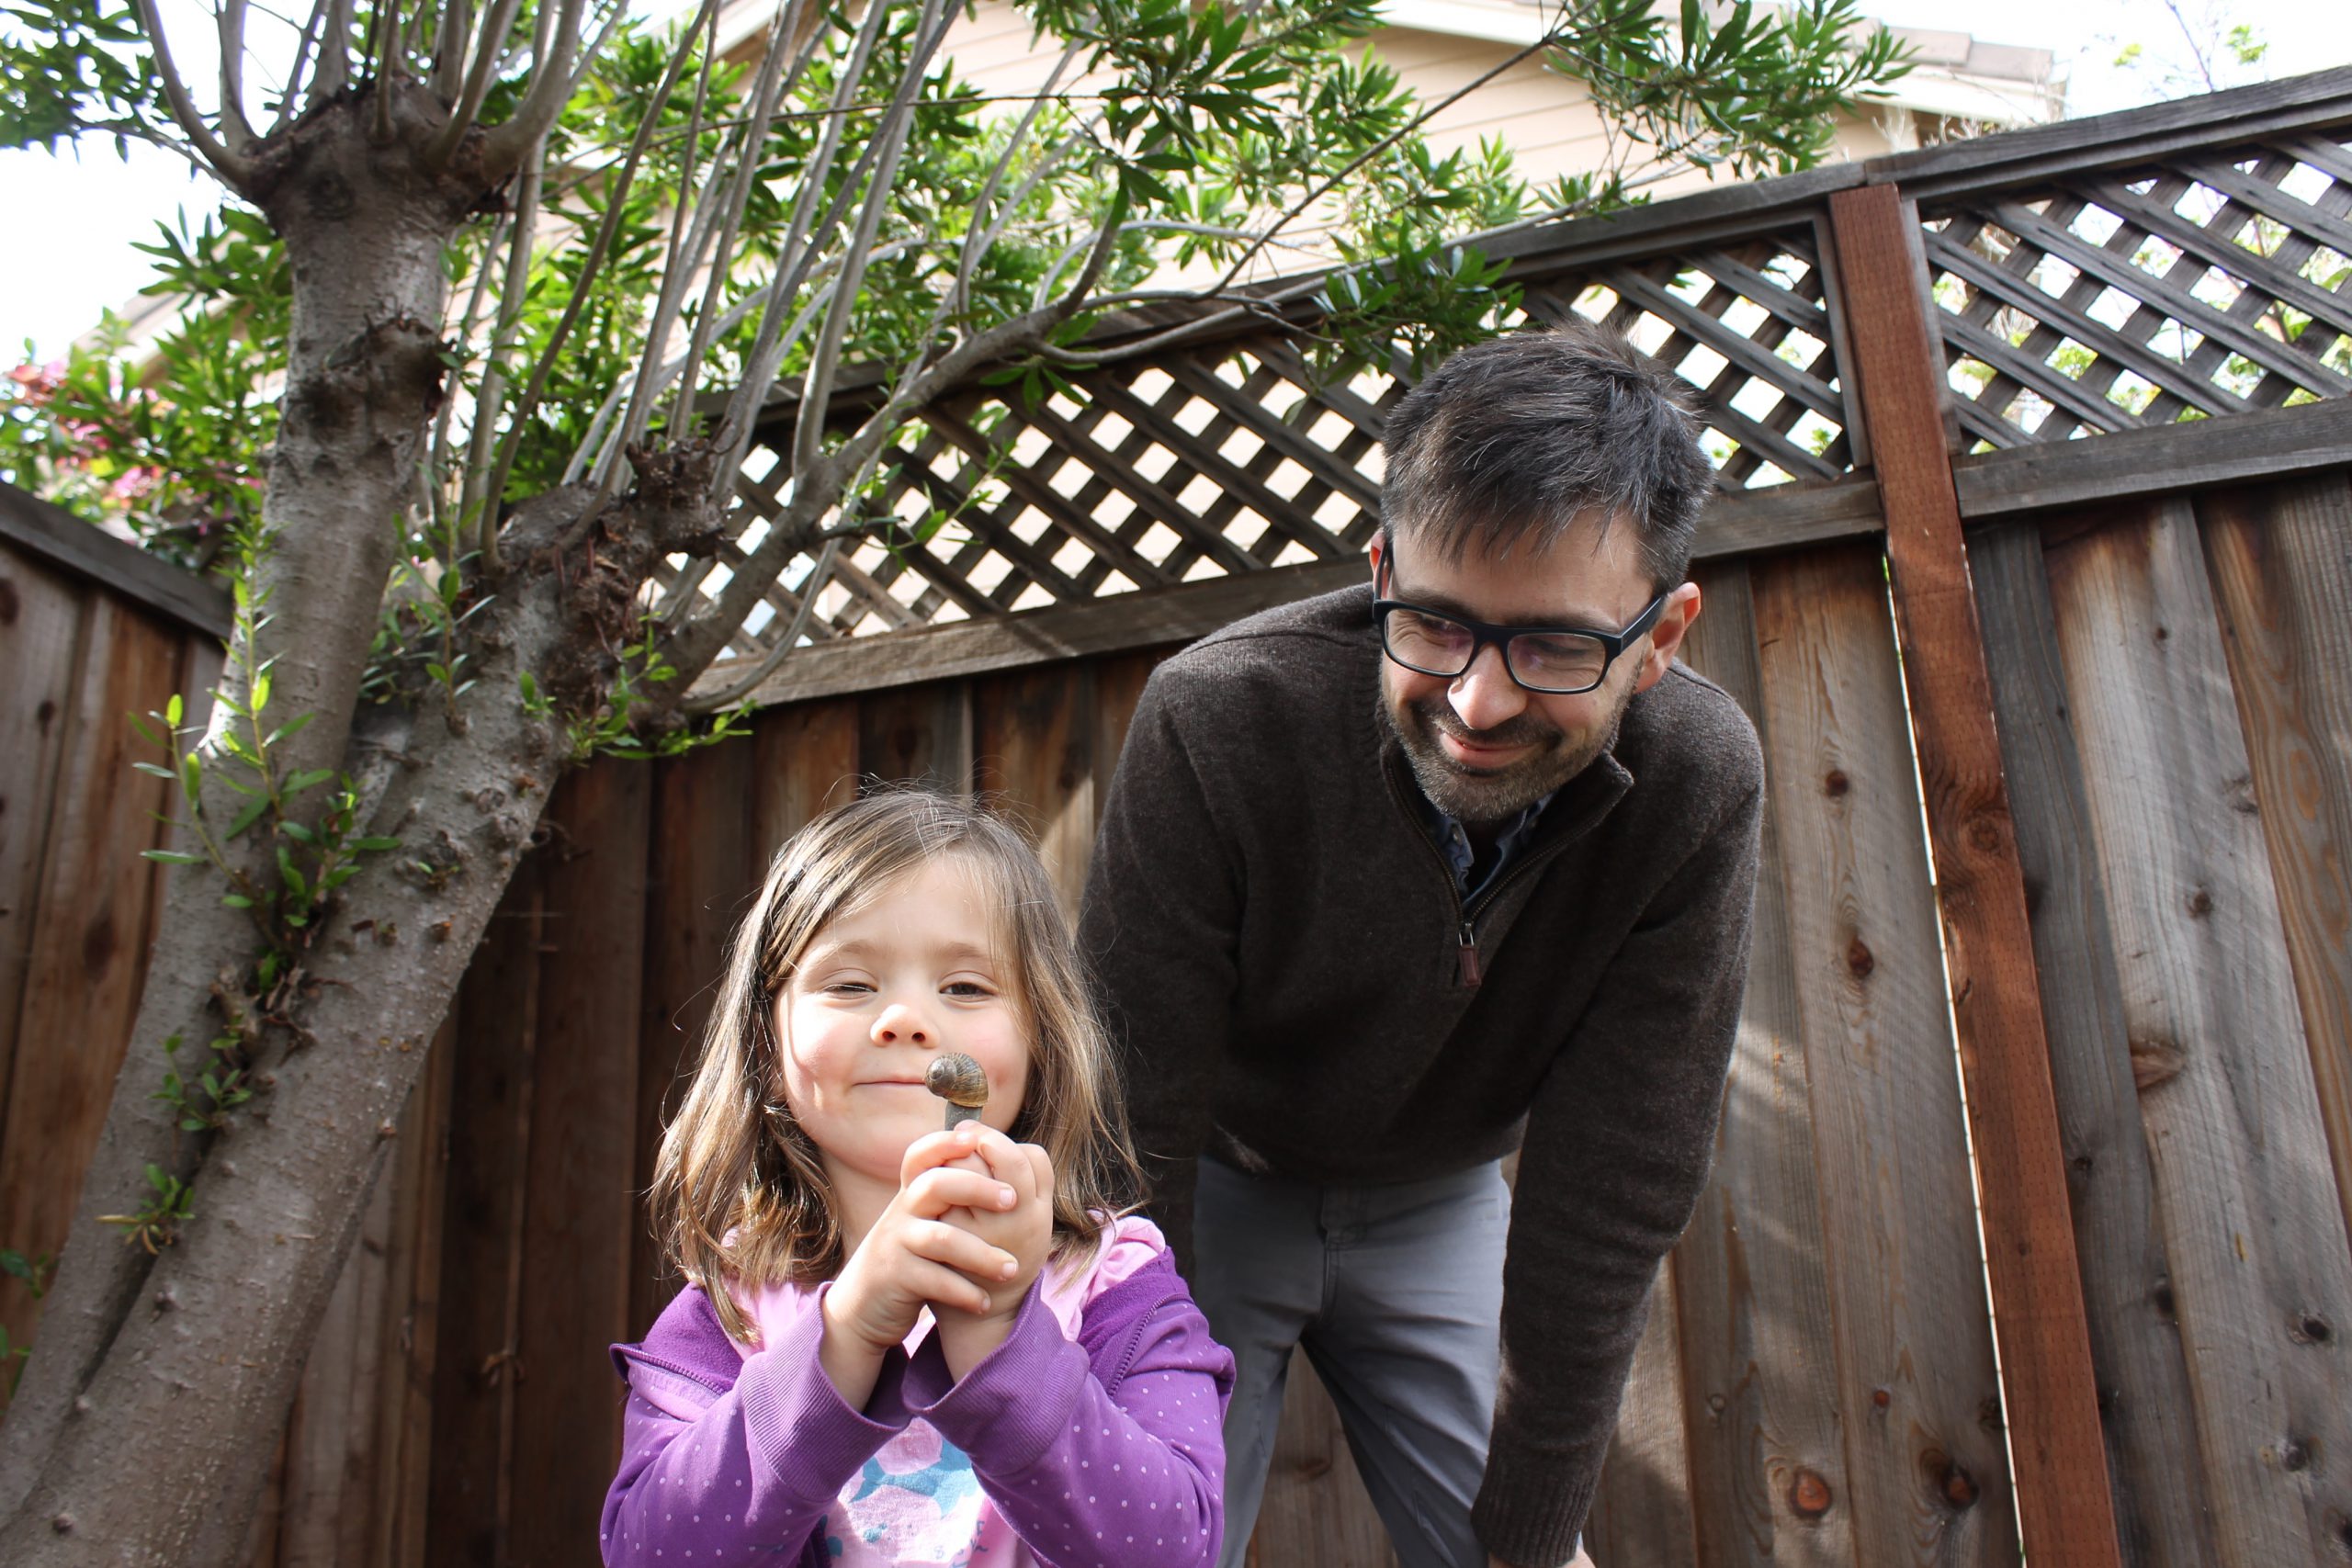 Nathanael Johnson and his daughter, holding a snail